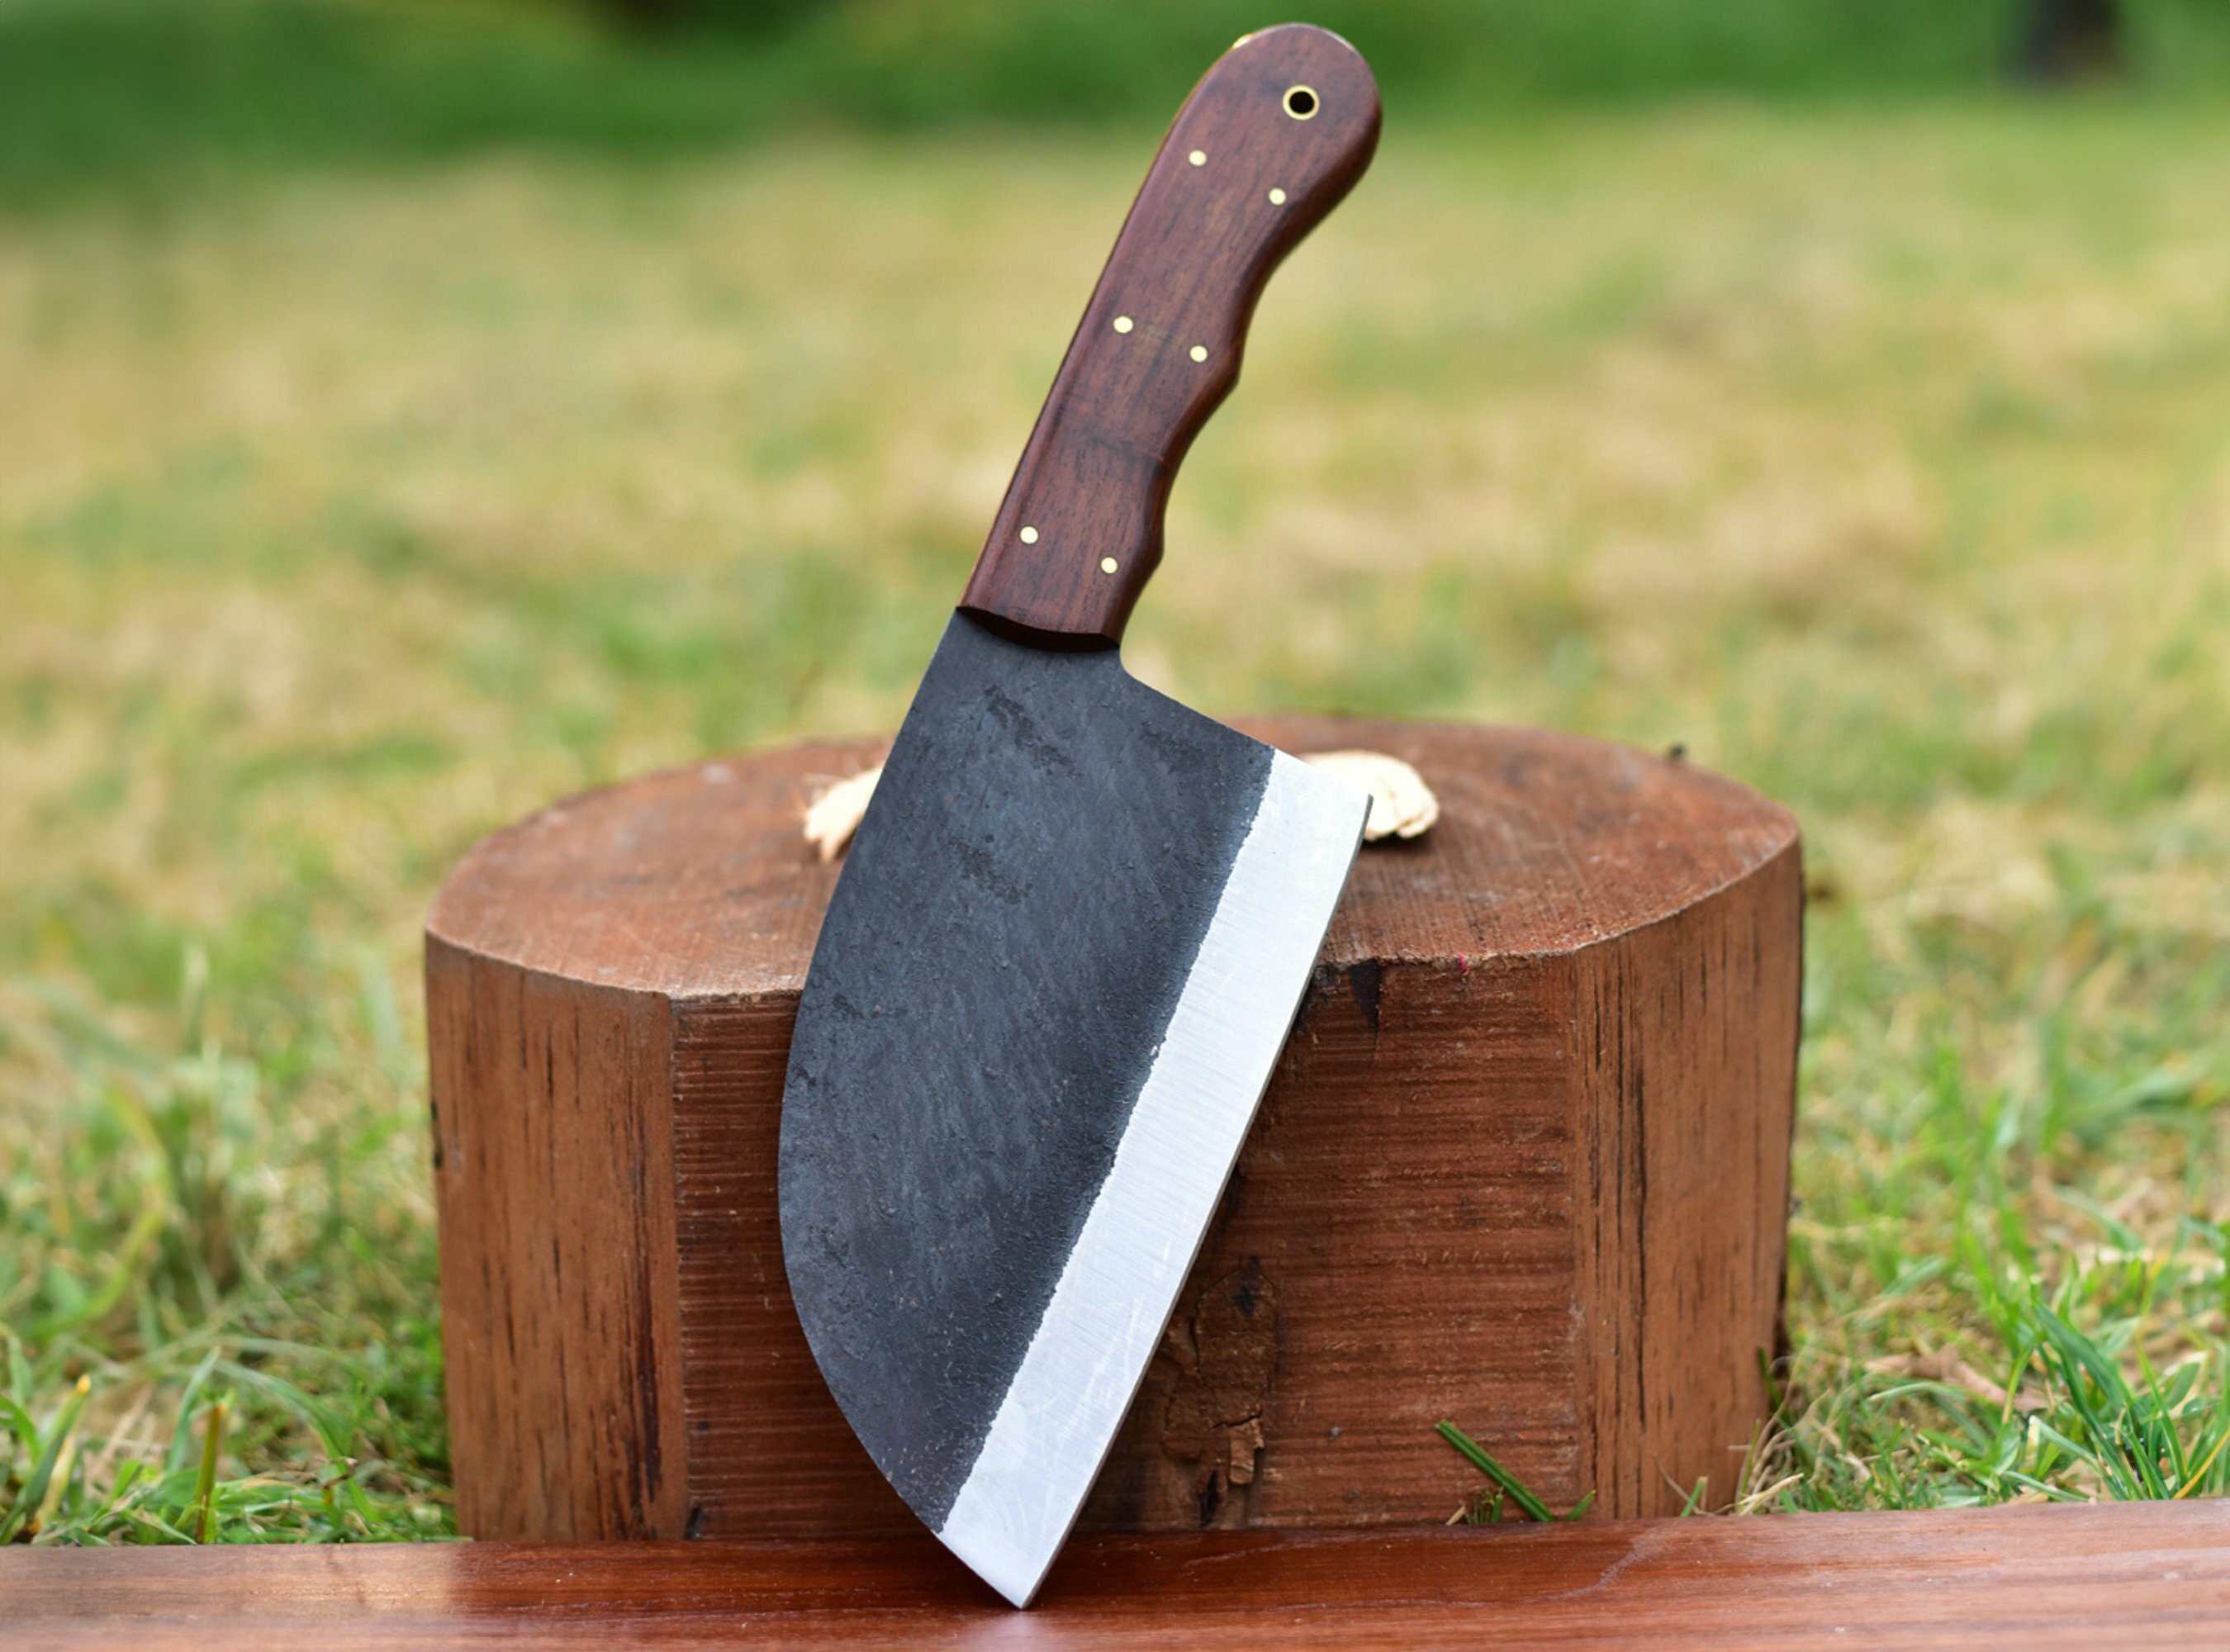 Dream Reach Men with The Pot Chef Knife Hand Forged Full Tang Viking Boning Knives with Sheath Butcher Meat Cleaver for Kitchen or Camping, Black